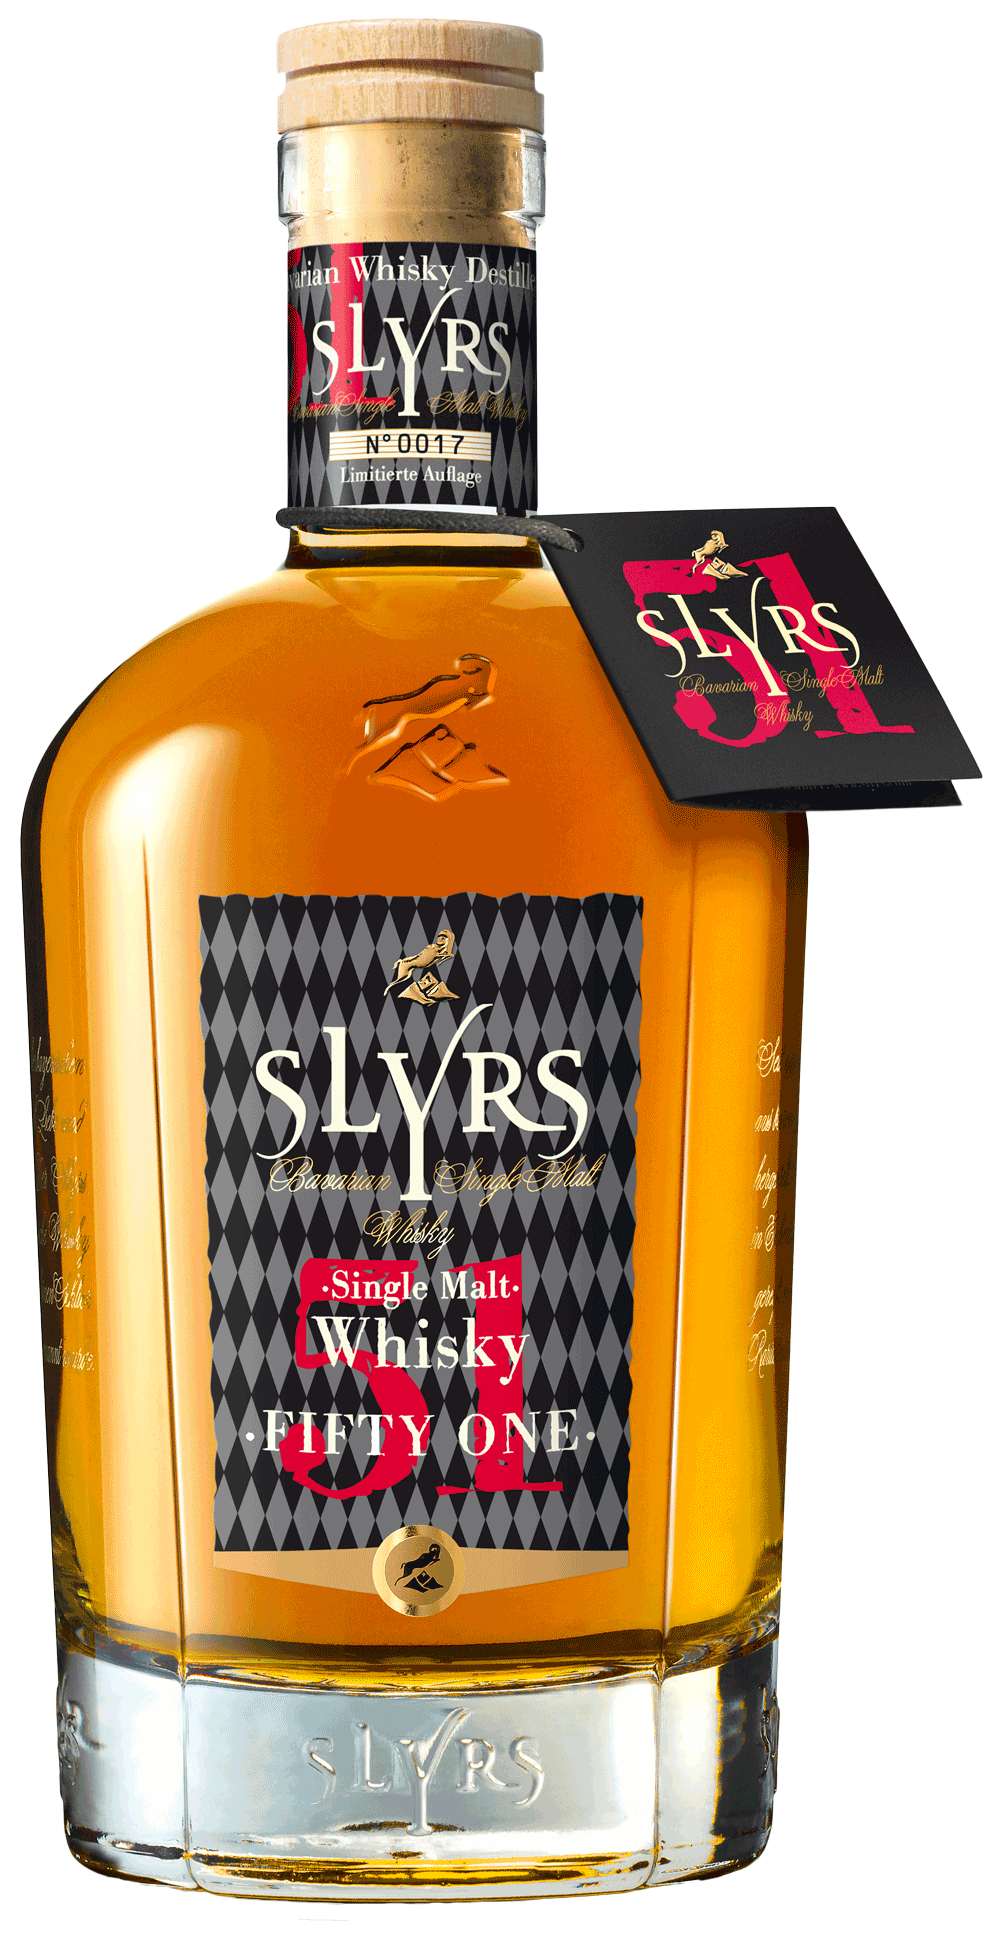 Slyrs 51 Fifty One Whisky 51%